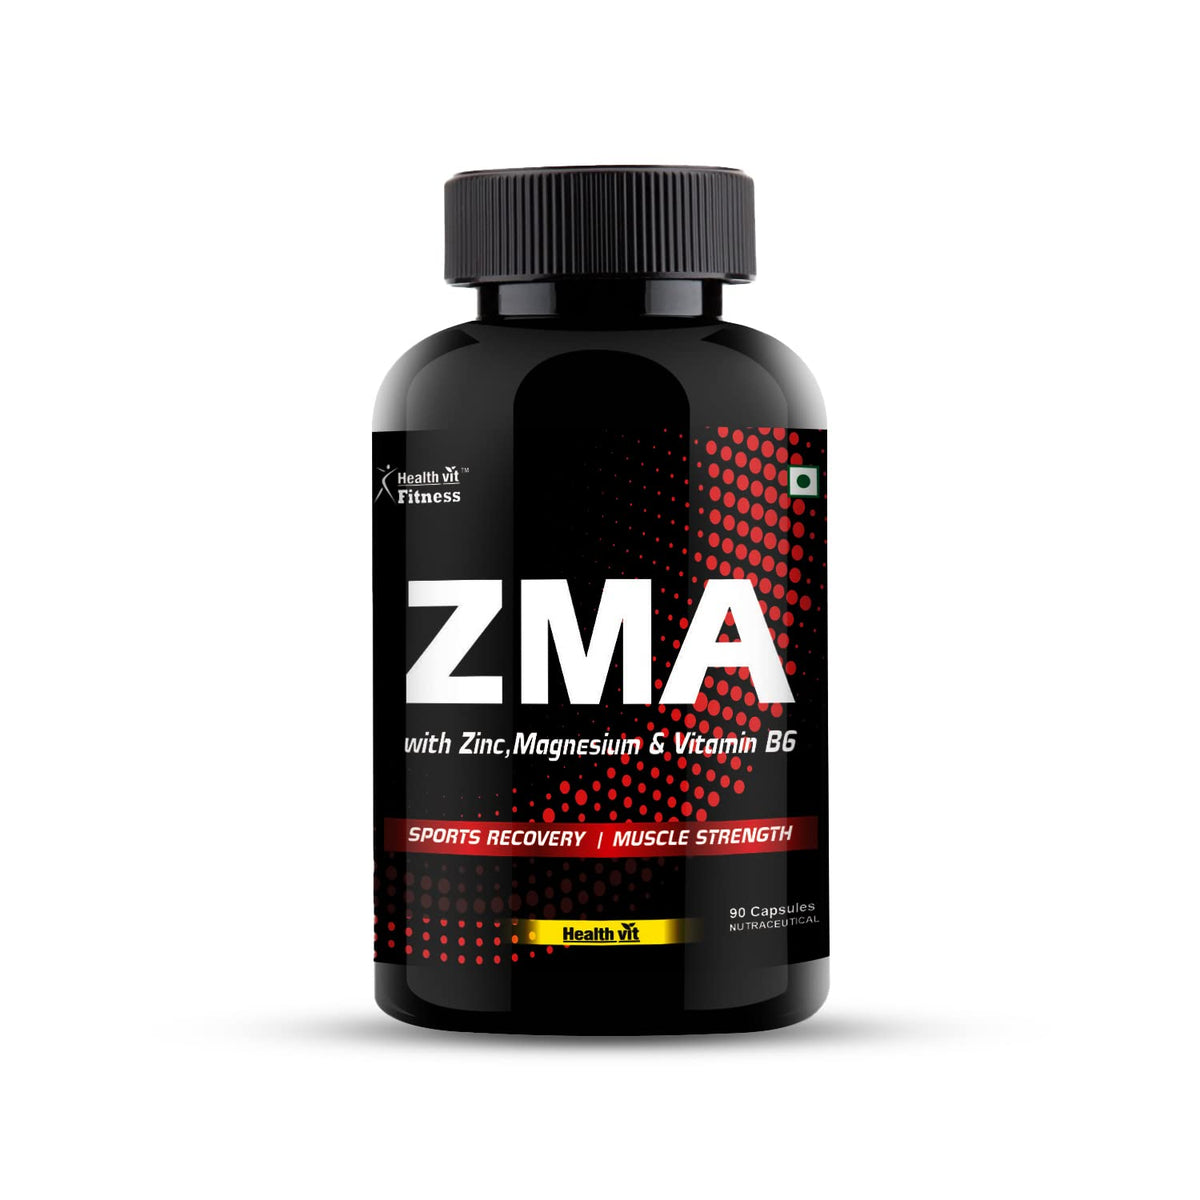 Healthvit Fitness ZMA Nighttime Recovery Support | ZMA supplement for men and women | Sleep Quality | Strength | Zinc, Magnesium, B6 Supplement | Metabolism booster | Immunity booster - (90 Capsules)